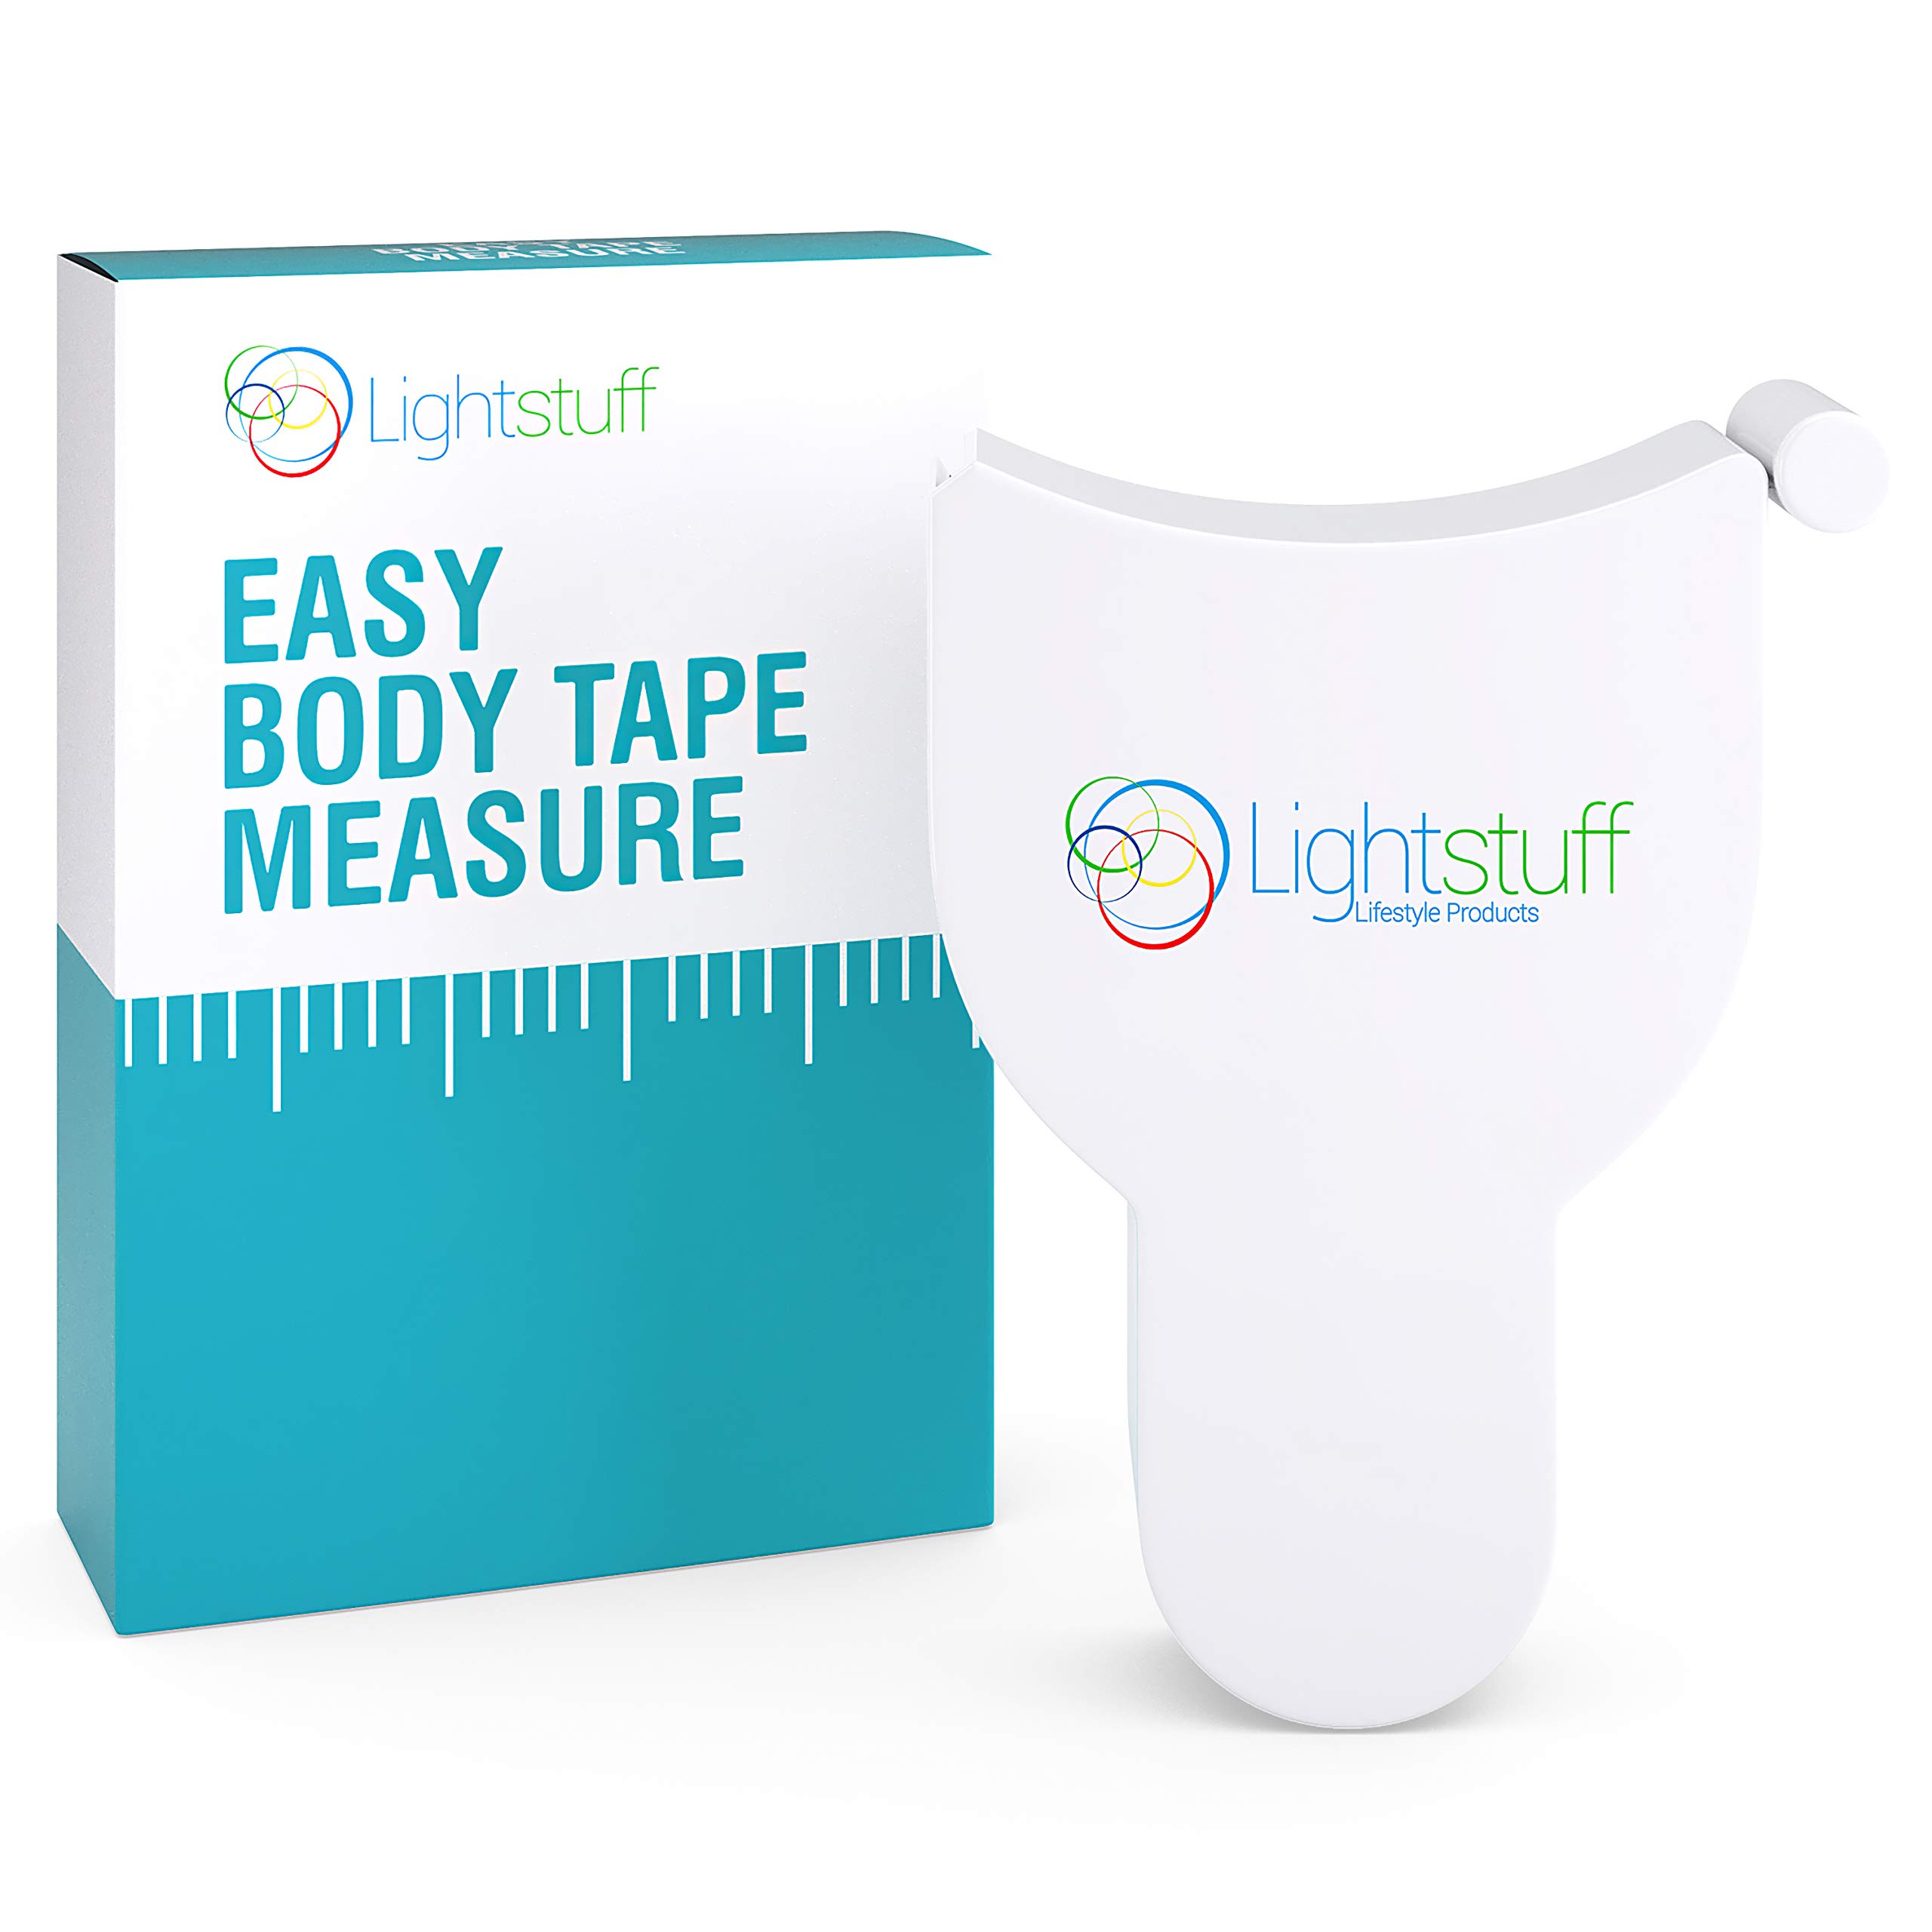 Book Cover Body Measuring Tape - Compact, Ergonomic Body Measurement Tape with One-Button Retraction Design - Smart, Accurate Way to Track Muscle Gain, Fat Loss - Lightstuff Easy Body Tape Measure